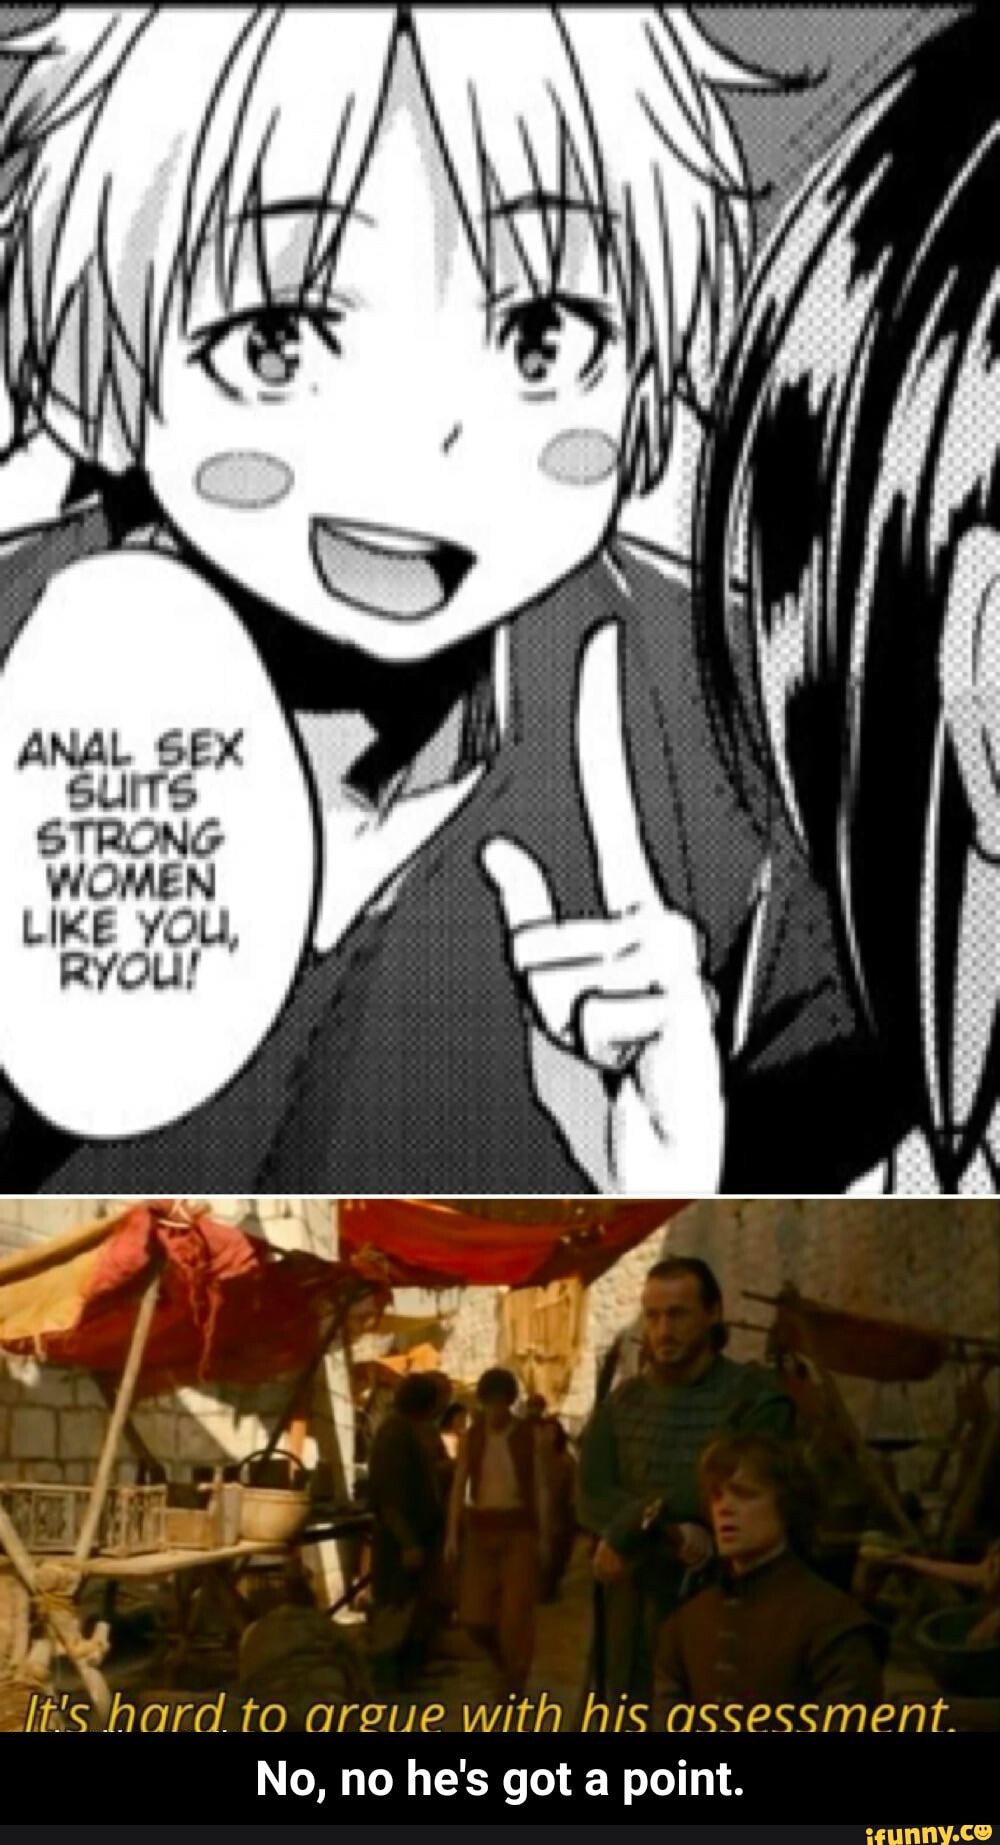 ANAL SEX SuITS STRONG WOMEN LIKE YOU, RYOU! Its hard to argue with his assessment